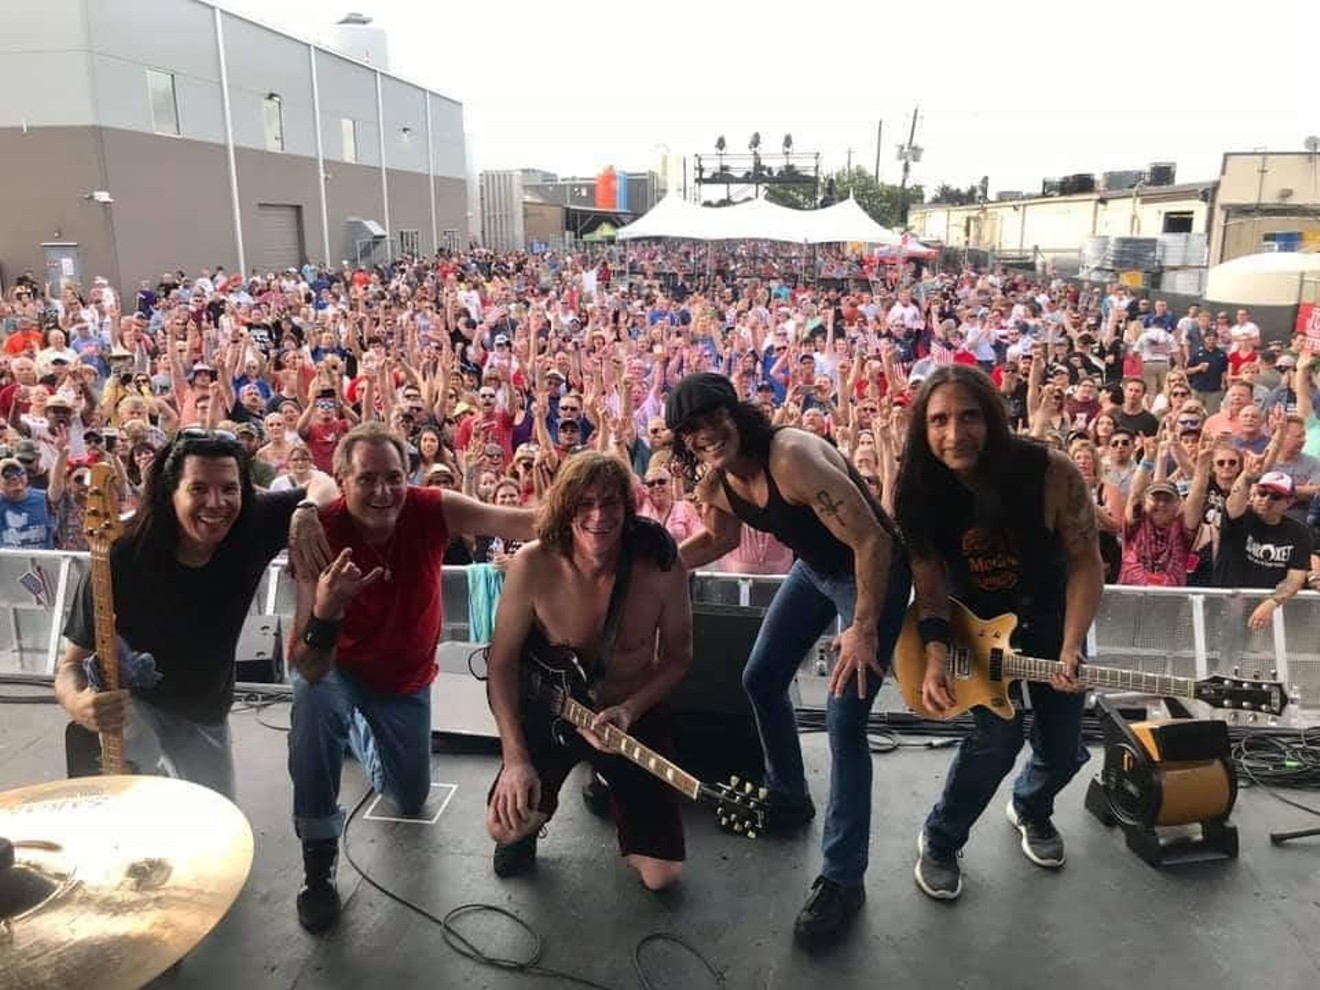 The AC/DC tribute band Back in Black including (left to right), bass player Sheldon Conrad, drummer Ken Schiumo, lead guitarist Mike Mroz, singer Darren Caperna and guitarist Ramiro Noriega, finish a set before a crowd of screaming fans at the Karbach Brewery in Houston.